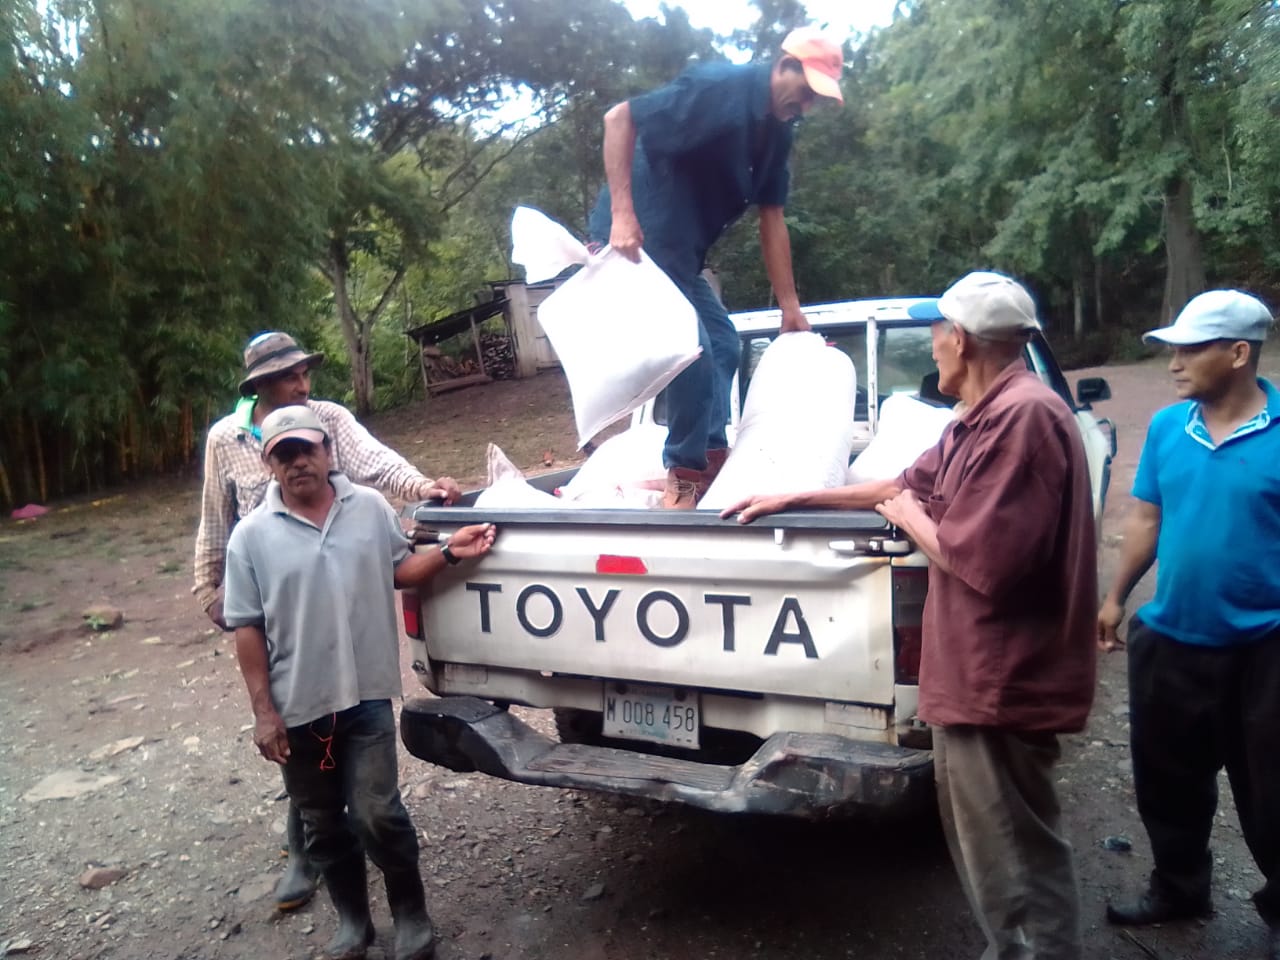 Volunteers from CEPAD in Nicaragua delivering supplies to victims in the aftermaths of Hurricanes Eta and Iota last year.